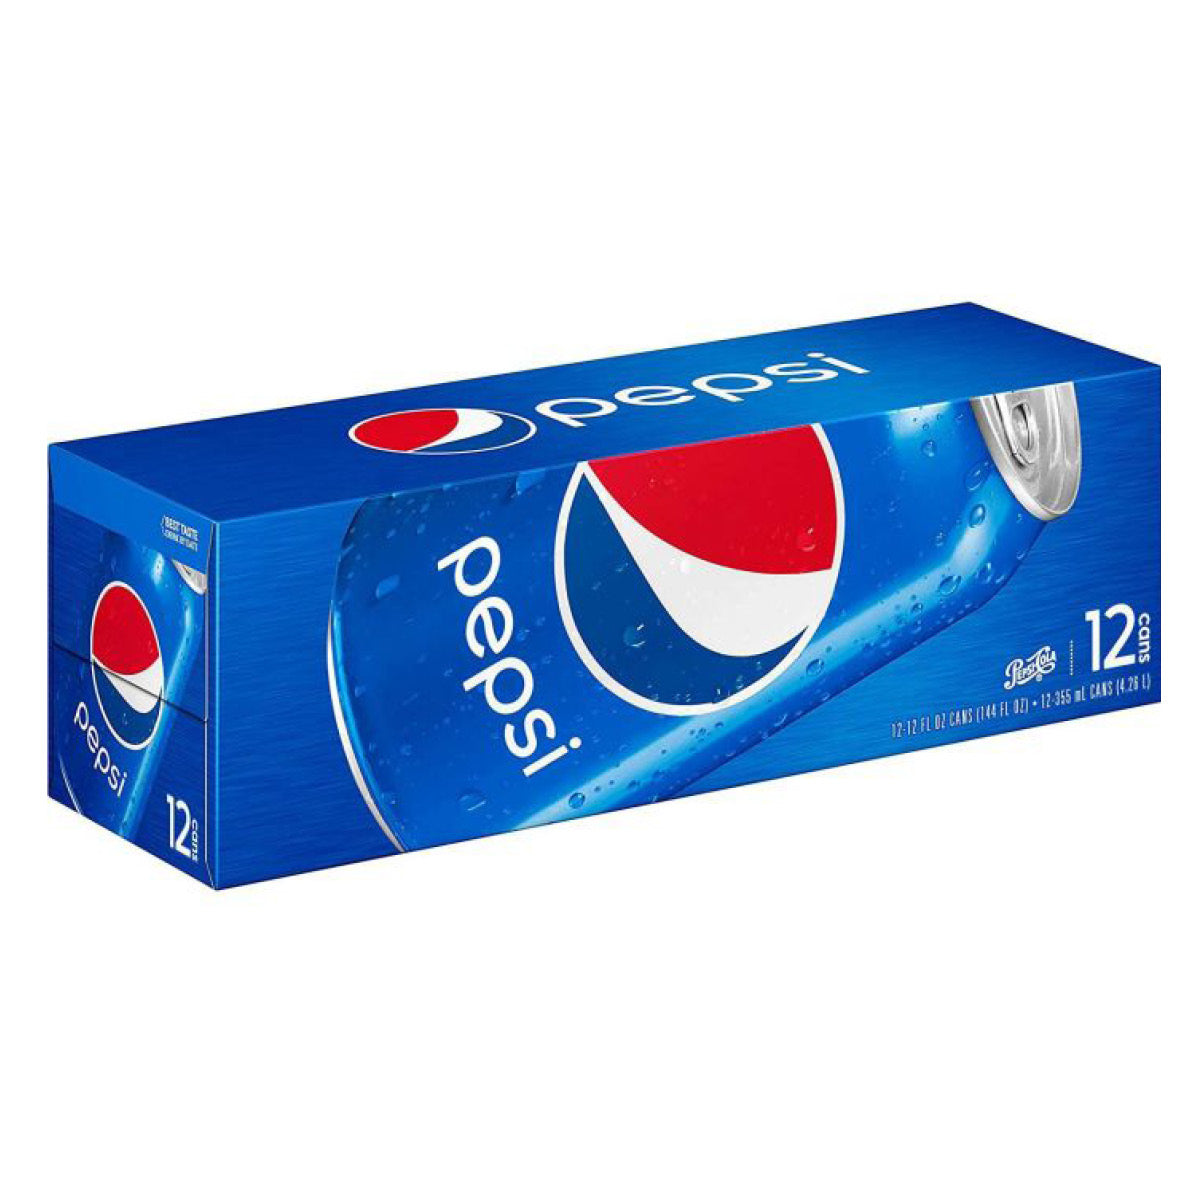 Pepsi Cans, 12 pk